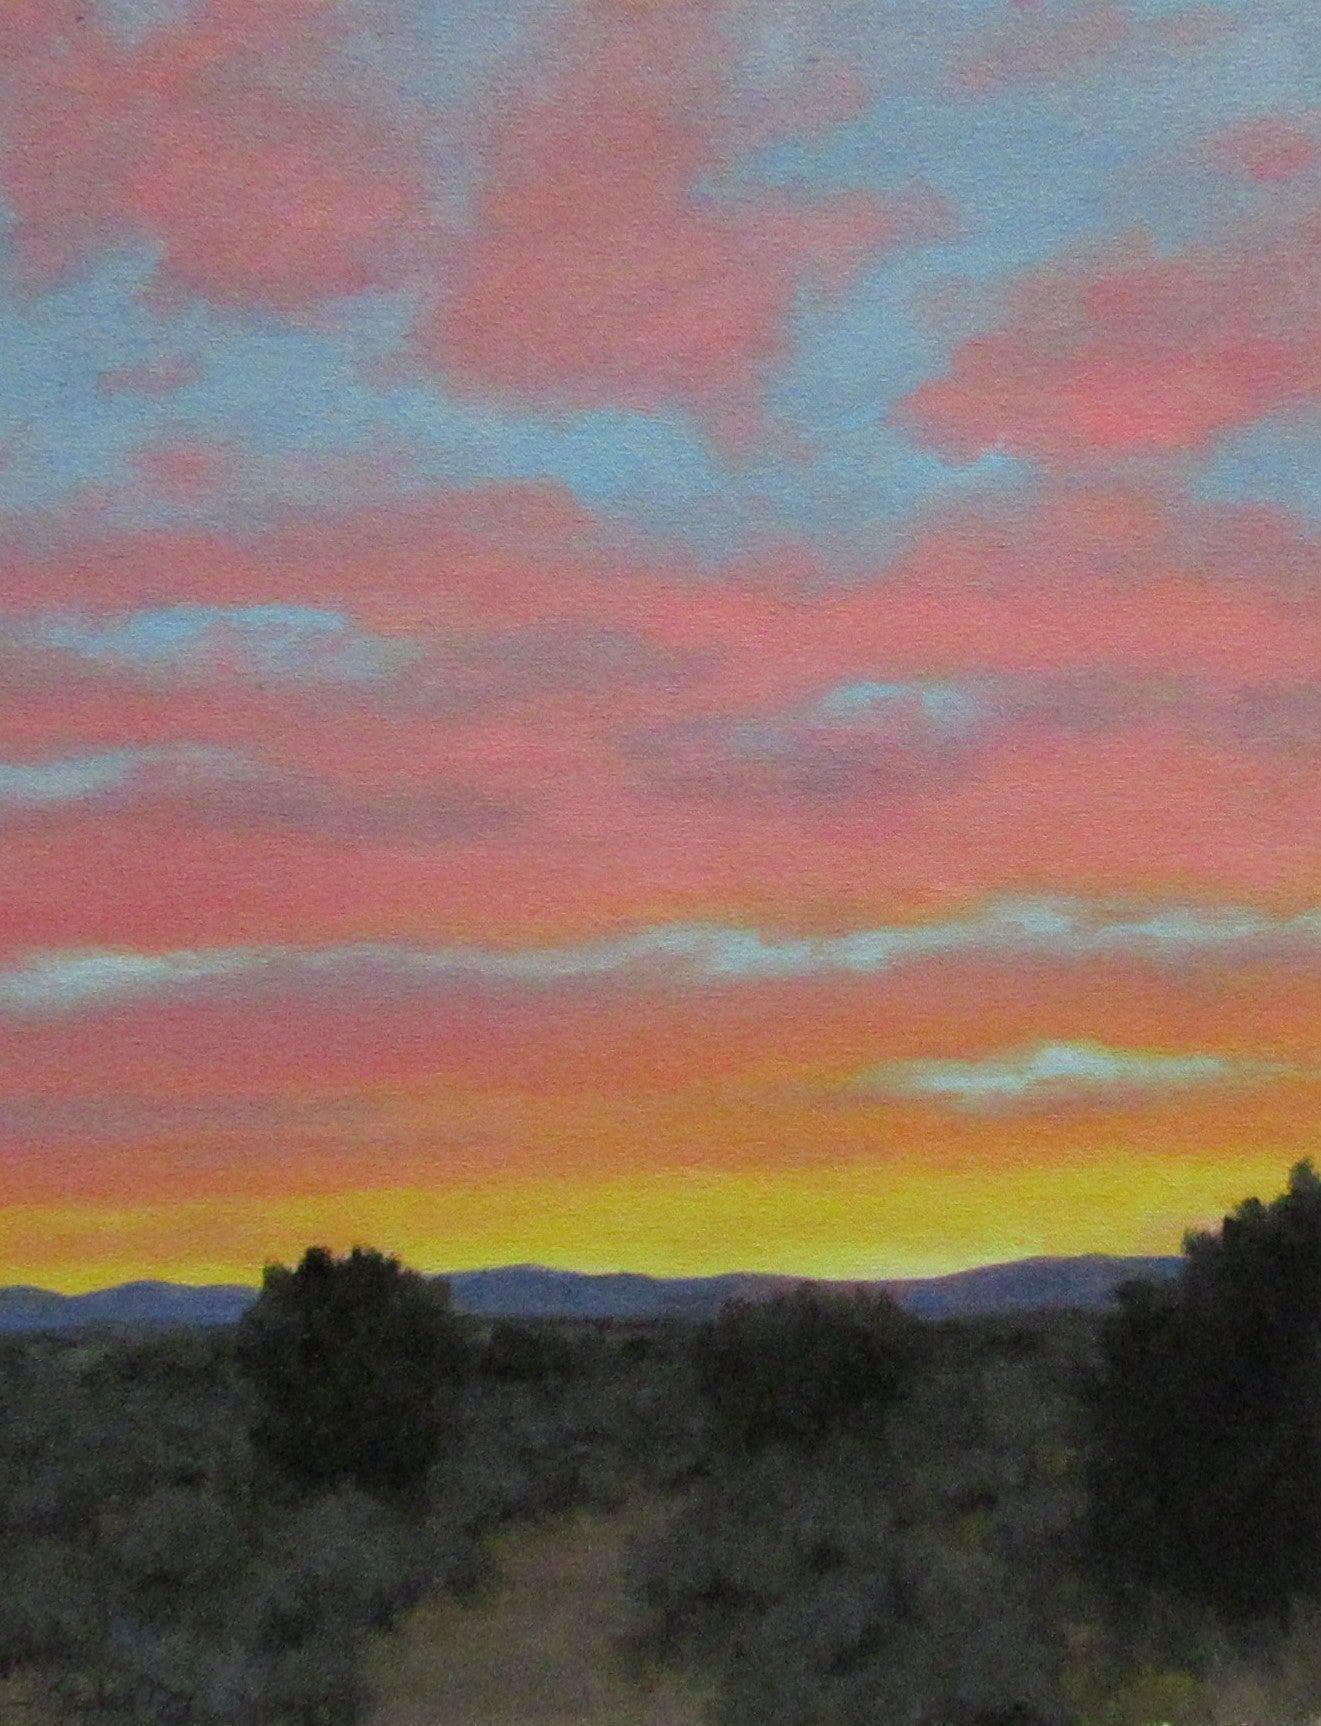 Bands of Evening Color-Painting-Stephen Day-Sorrel Sky Gallery